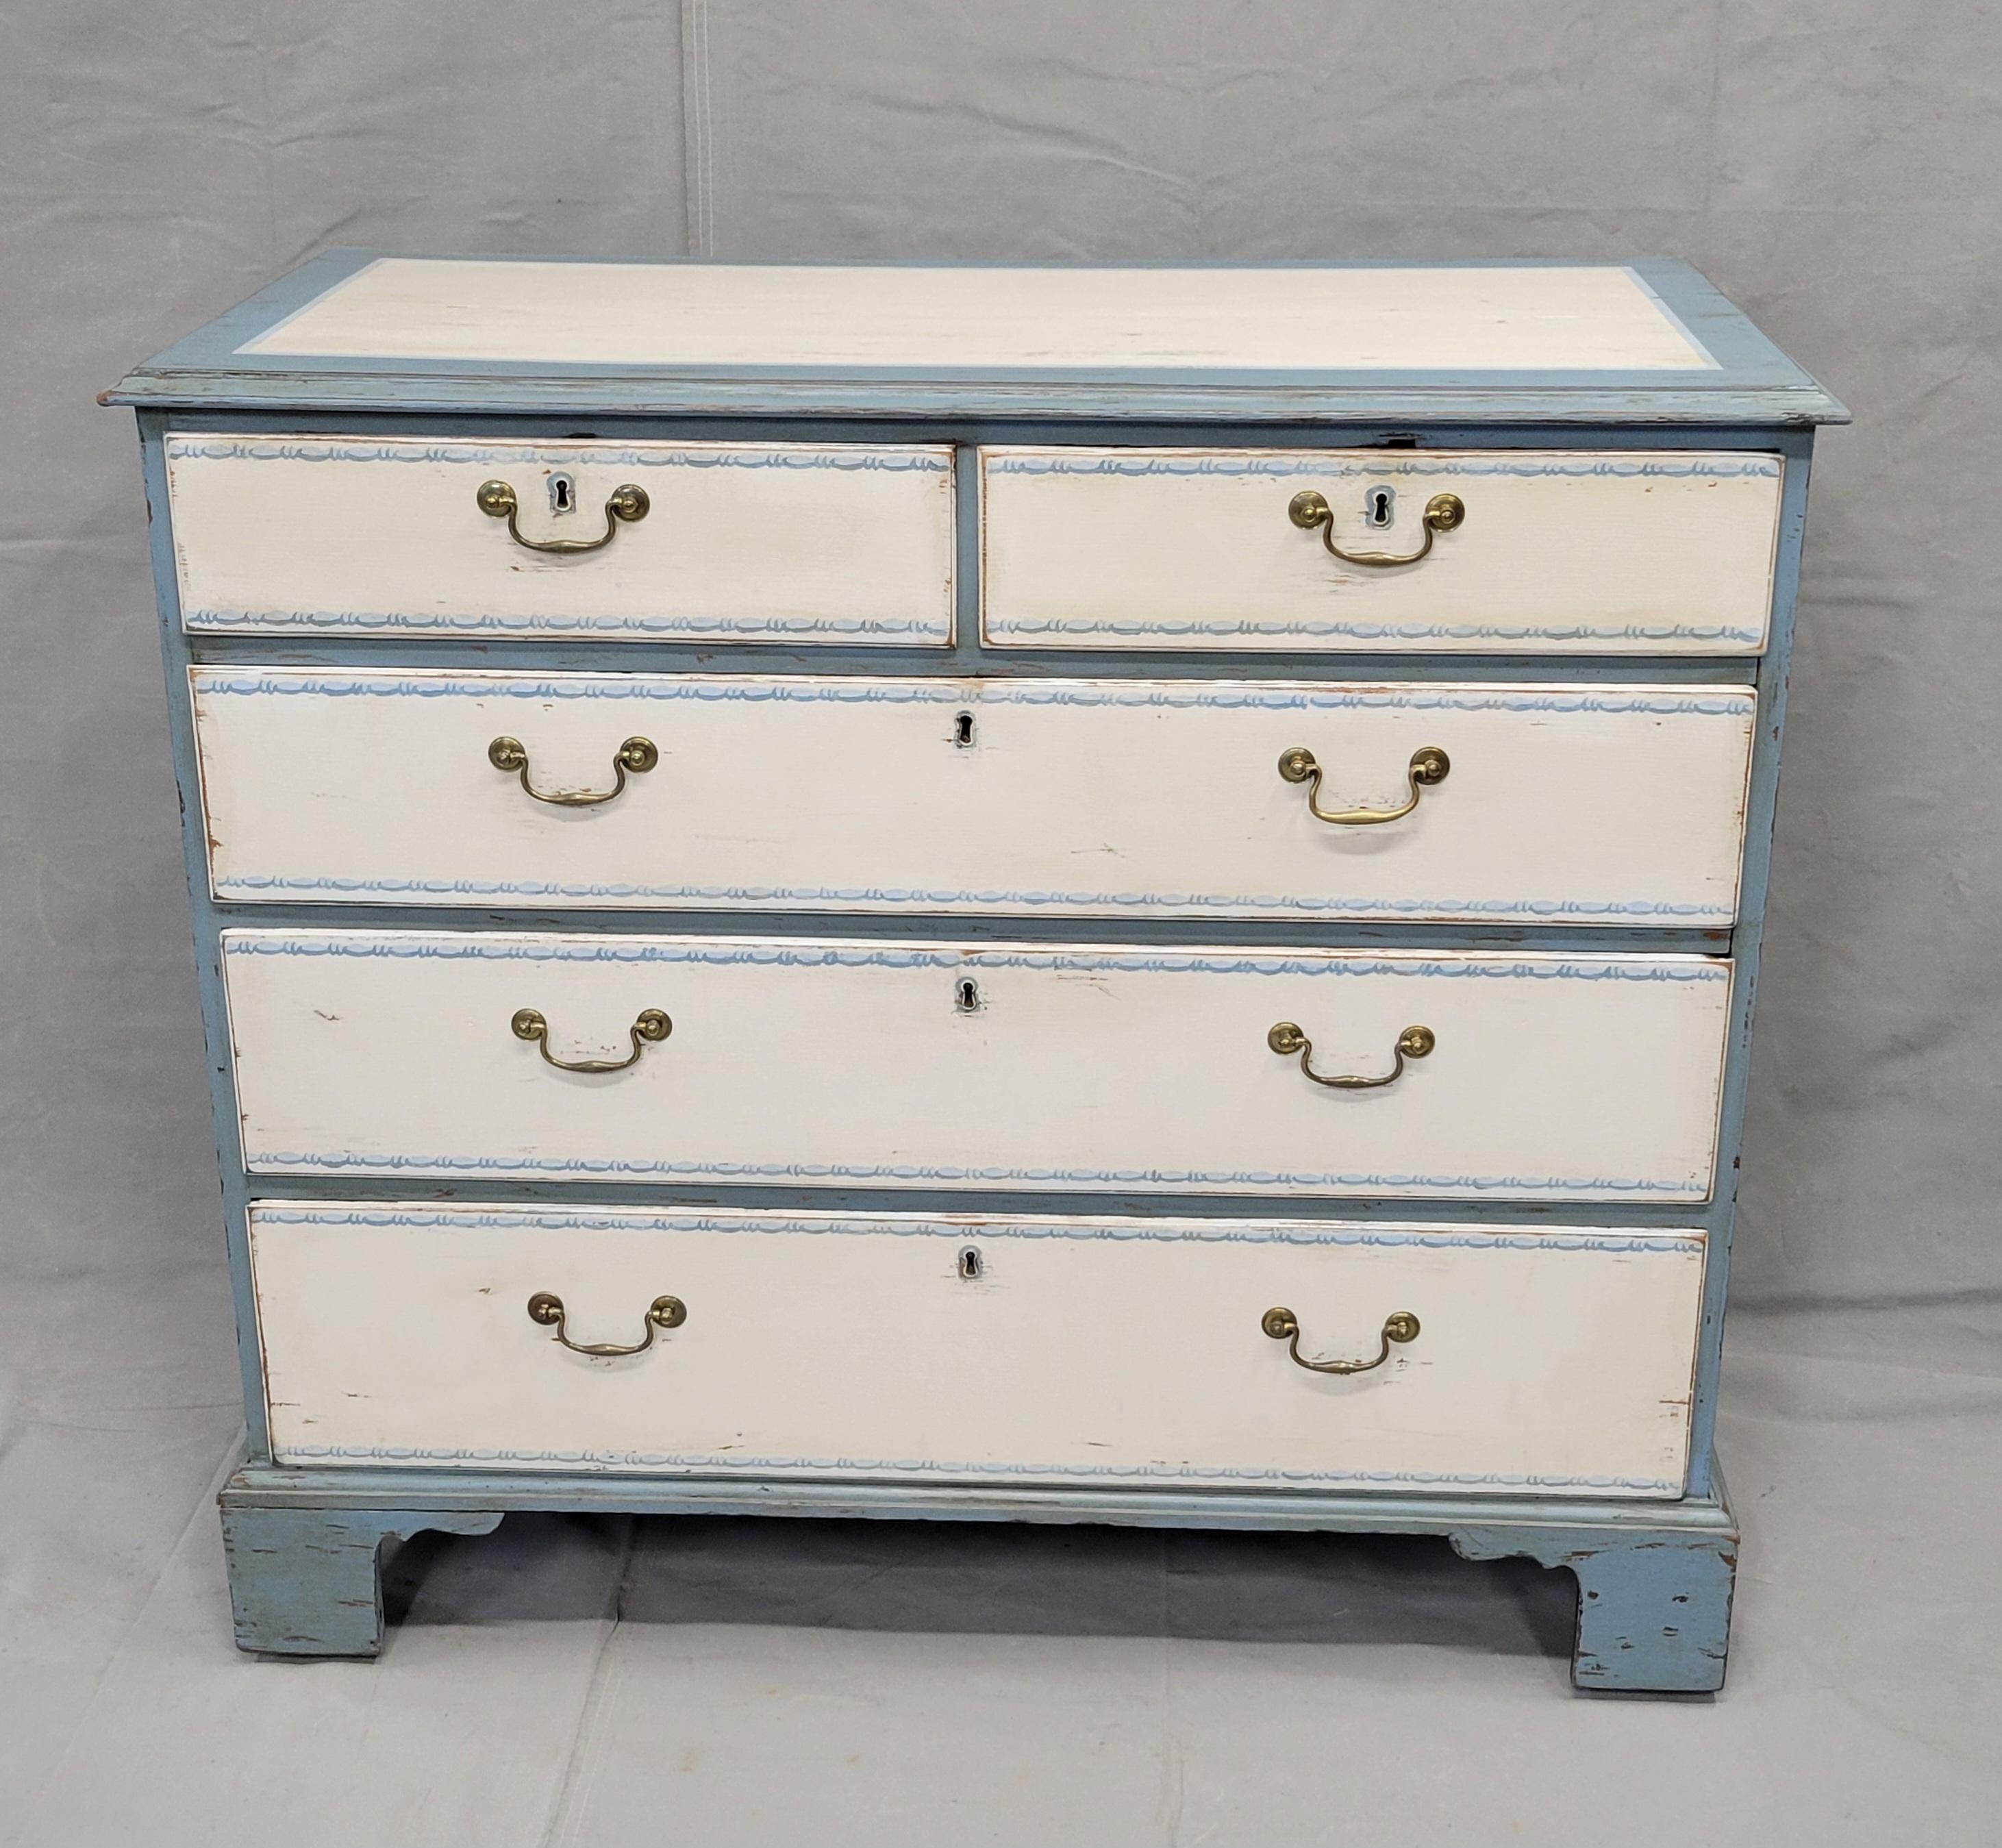 This antique dresser from England dates back to the 1850s and features a beautiful blue and white painted finish on oak wood. A painted, shaded bead stencil design decorates the drawers while distressed blue and white painted panels adorn the top